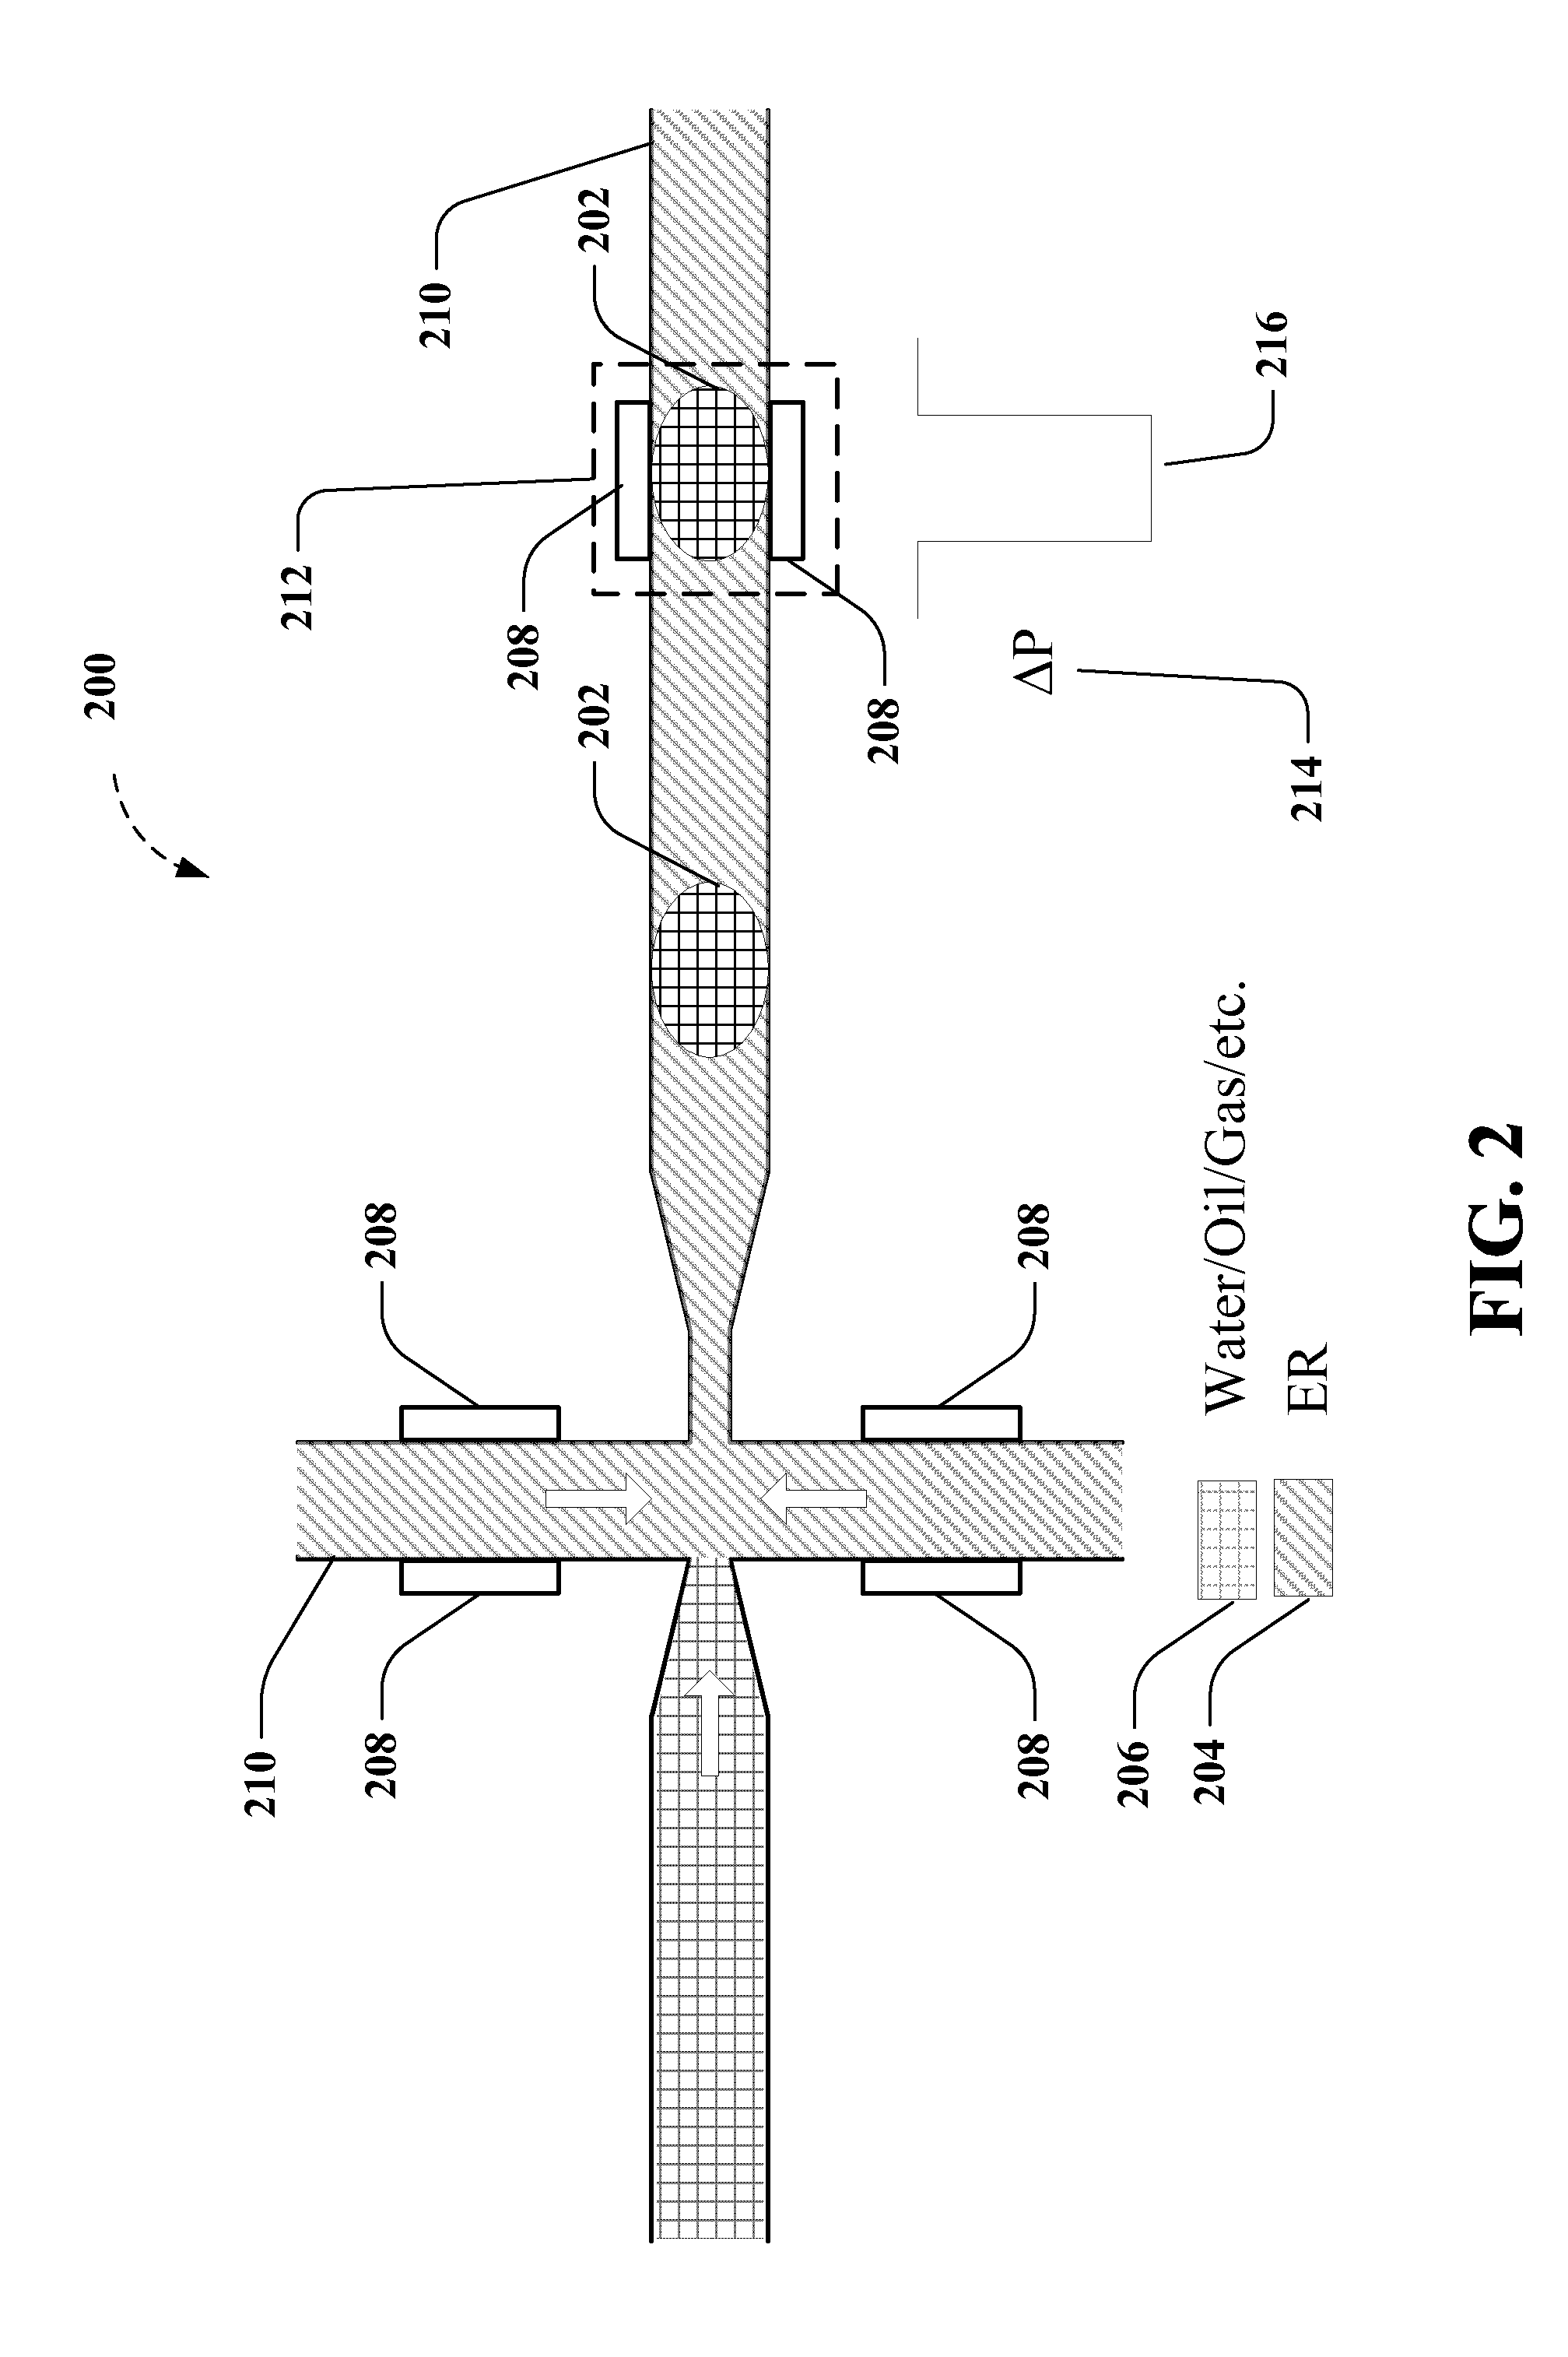 Microfluidic droplet generation and/or manipulation with electrorheological fluid